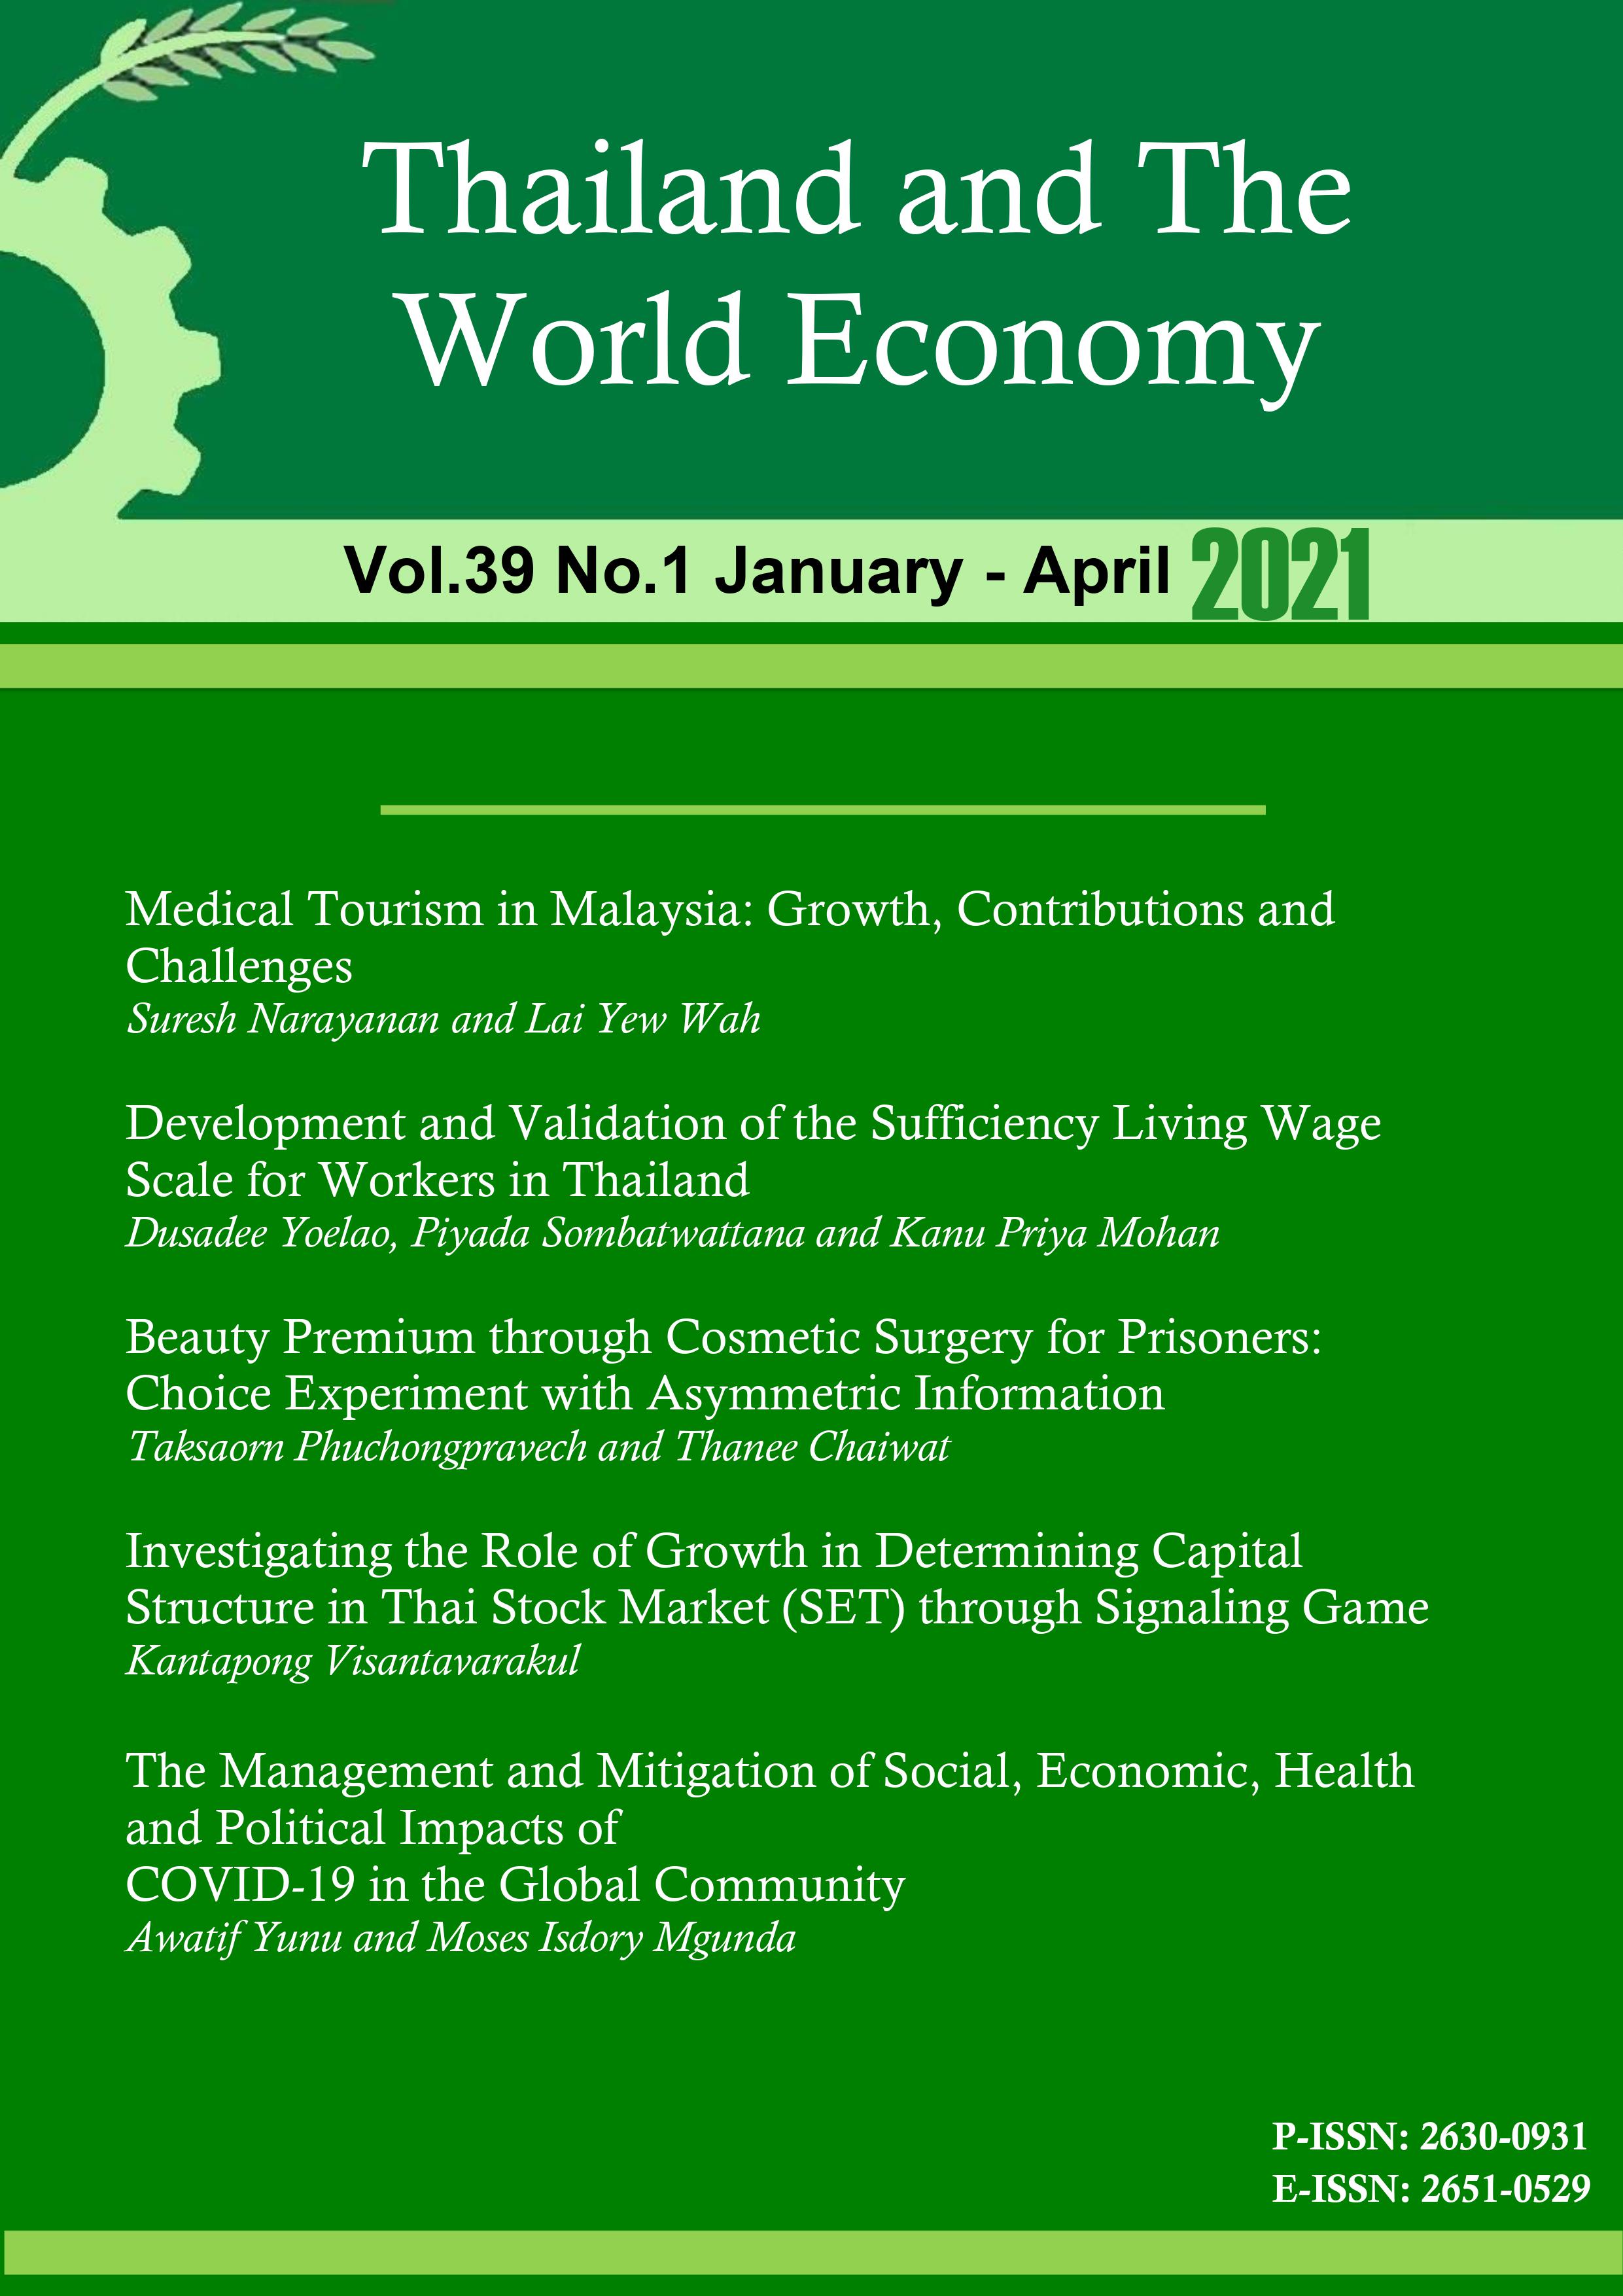 					View Vol. 39 No. 1 (2021): Thailand and the World Economy
				